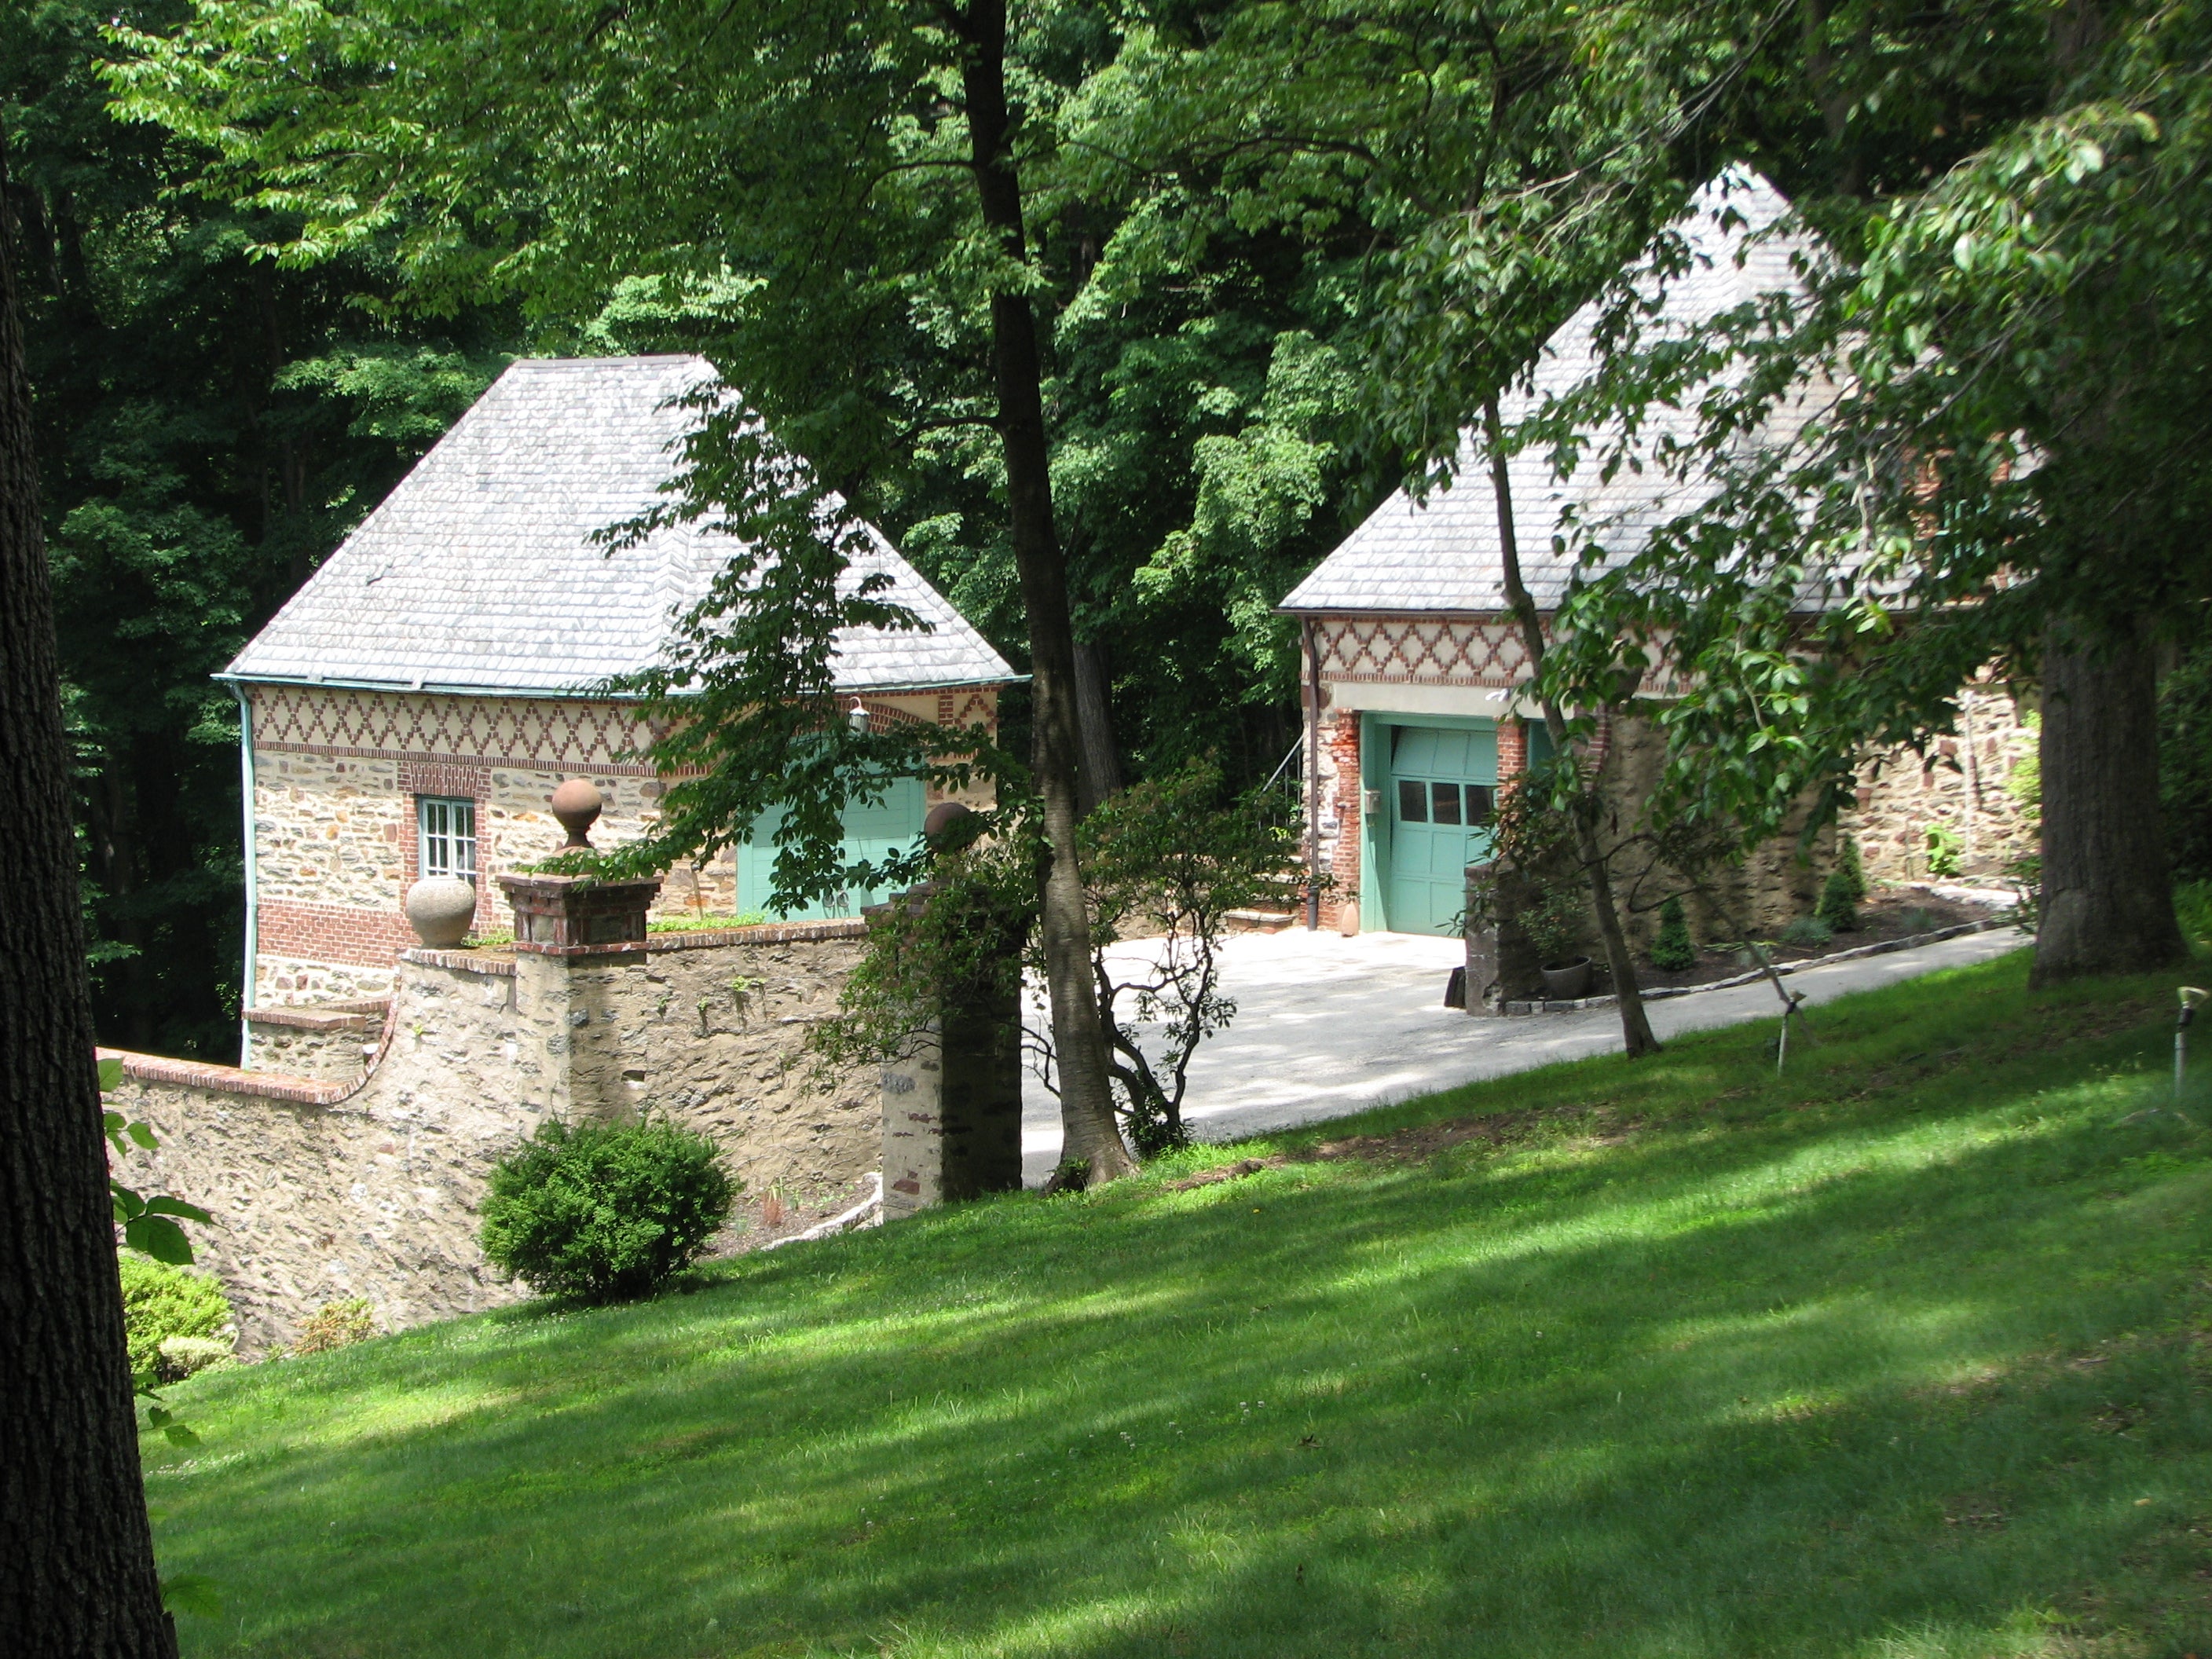 Outbuildings sit on a separate ledge overlooking the park.